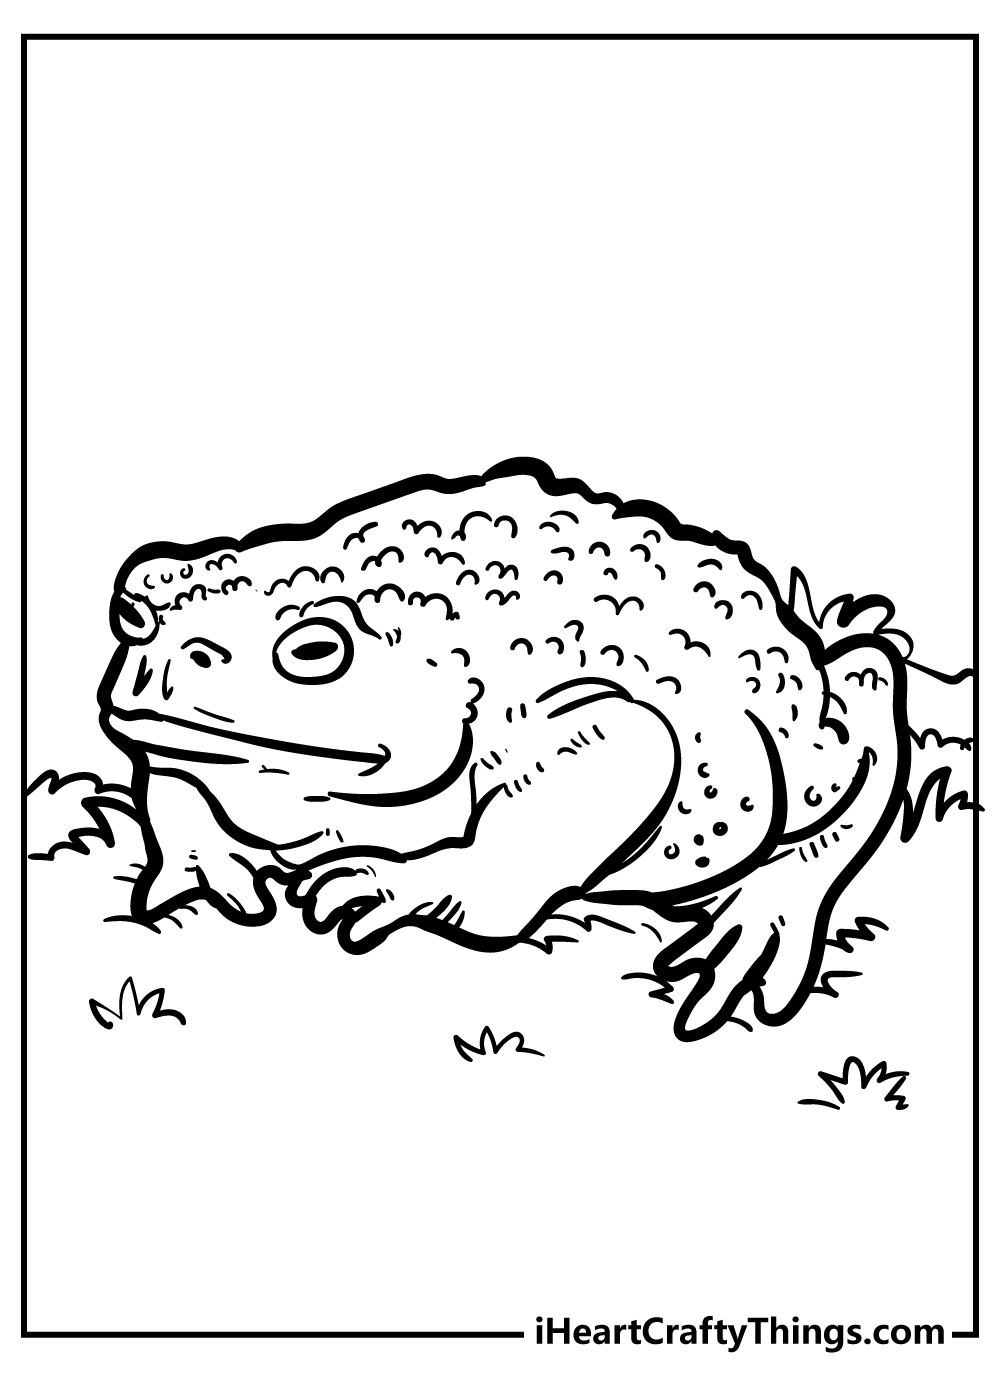 Toad Coloring Pages for kids free download